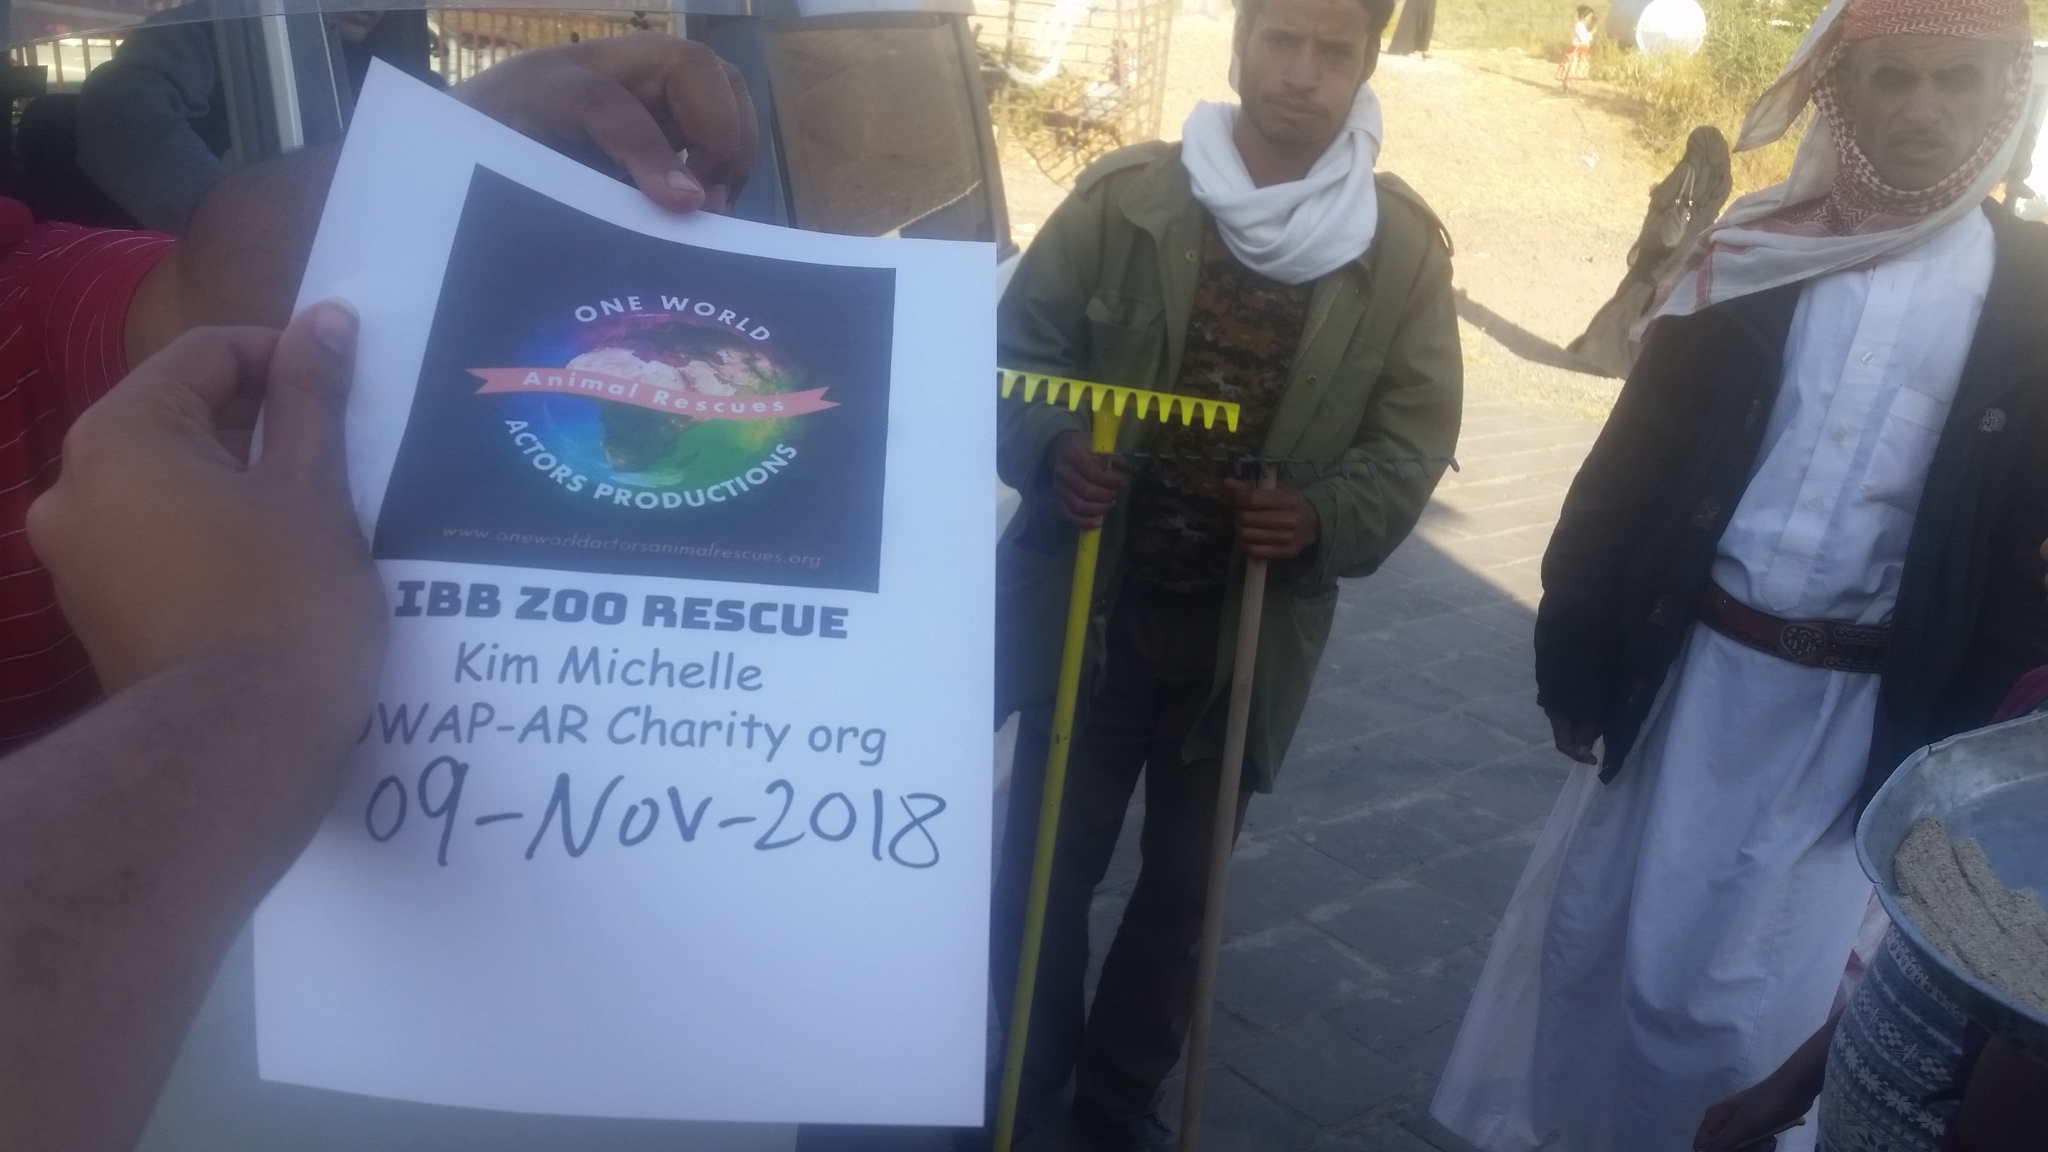 ibb zoo 9 NOV 2018 hisham pic with OWAP-AR sign cleaning toold provded by our Charity yemen rescue.jpg